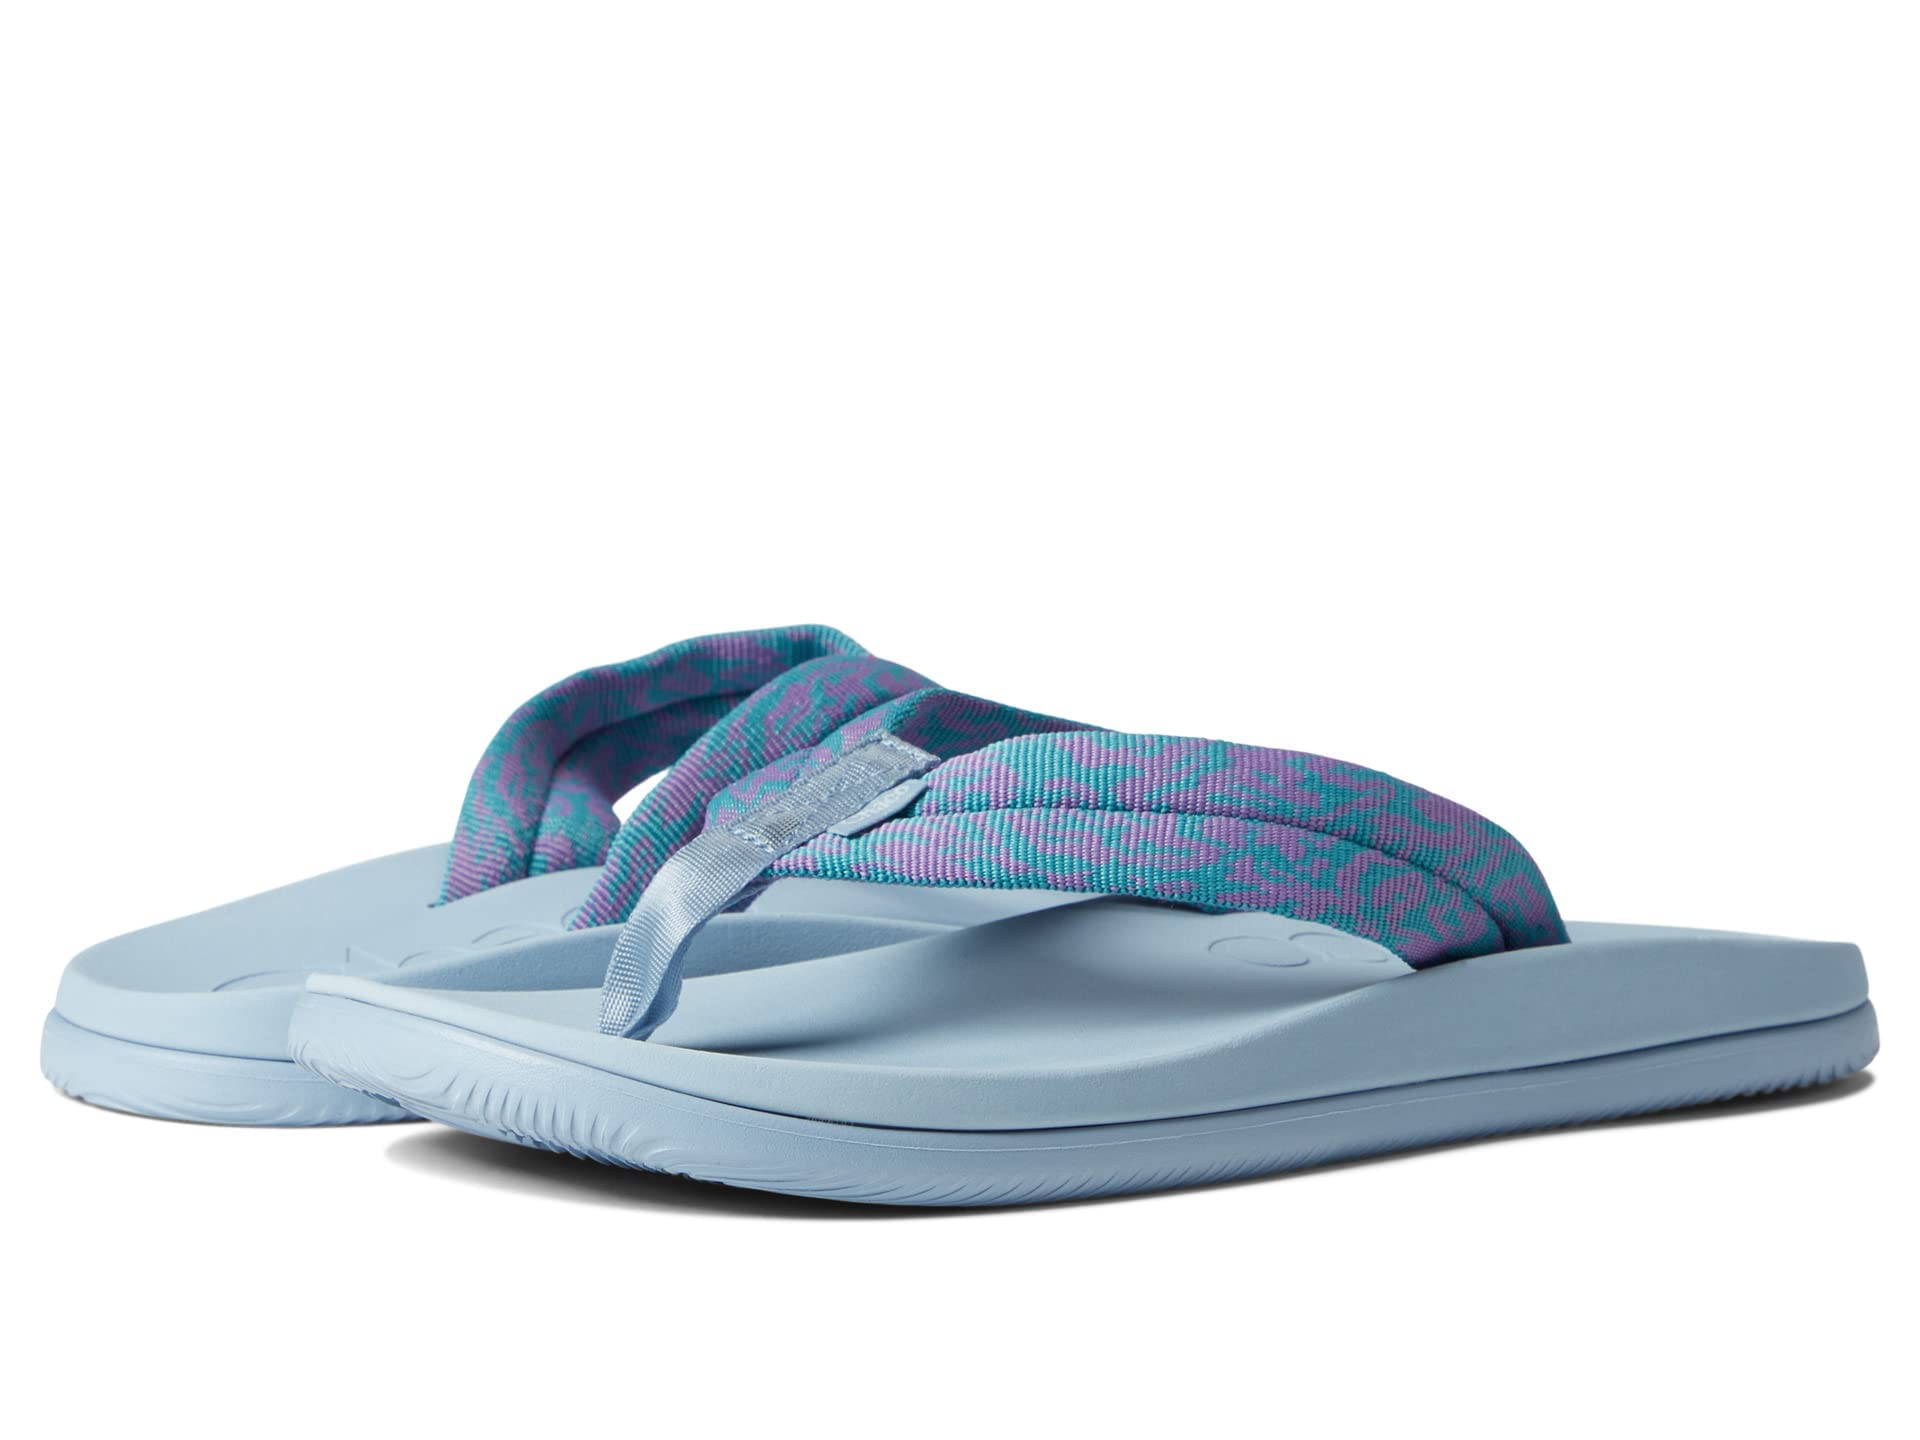 Chaco Women's Chillos Flip Flop (Breeze Teal) $17.57 + Free Shipping w/ Prime or on $35+